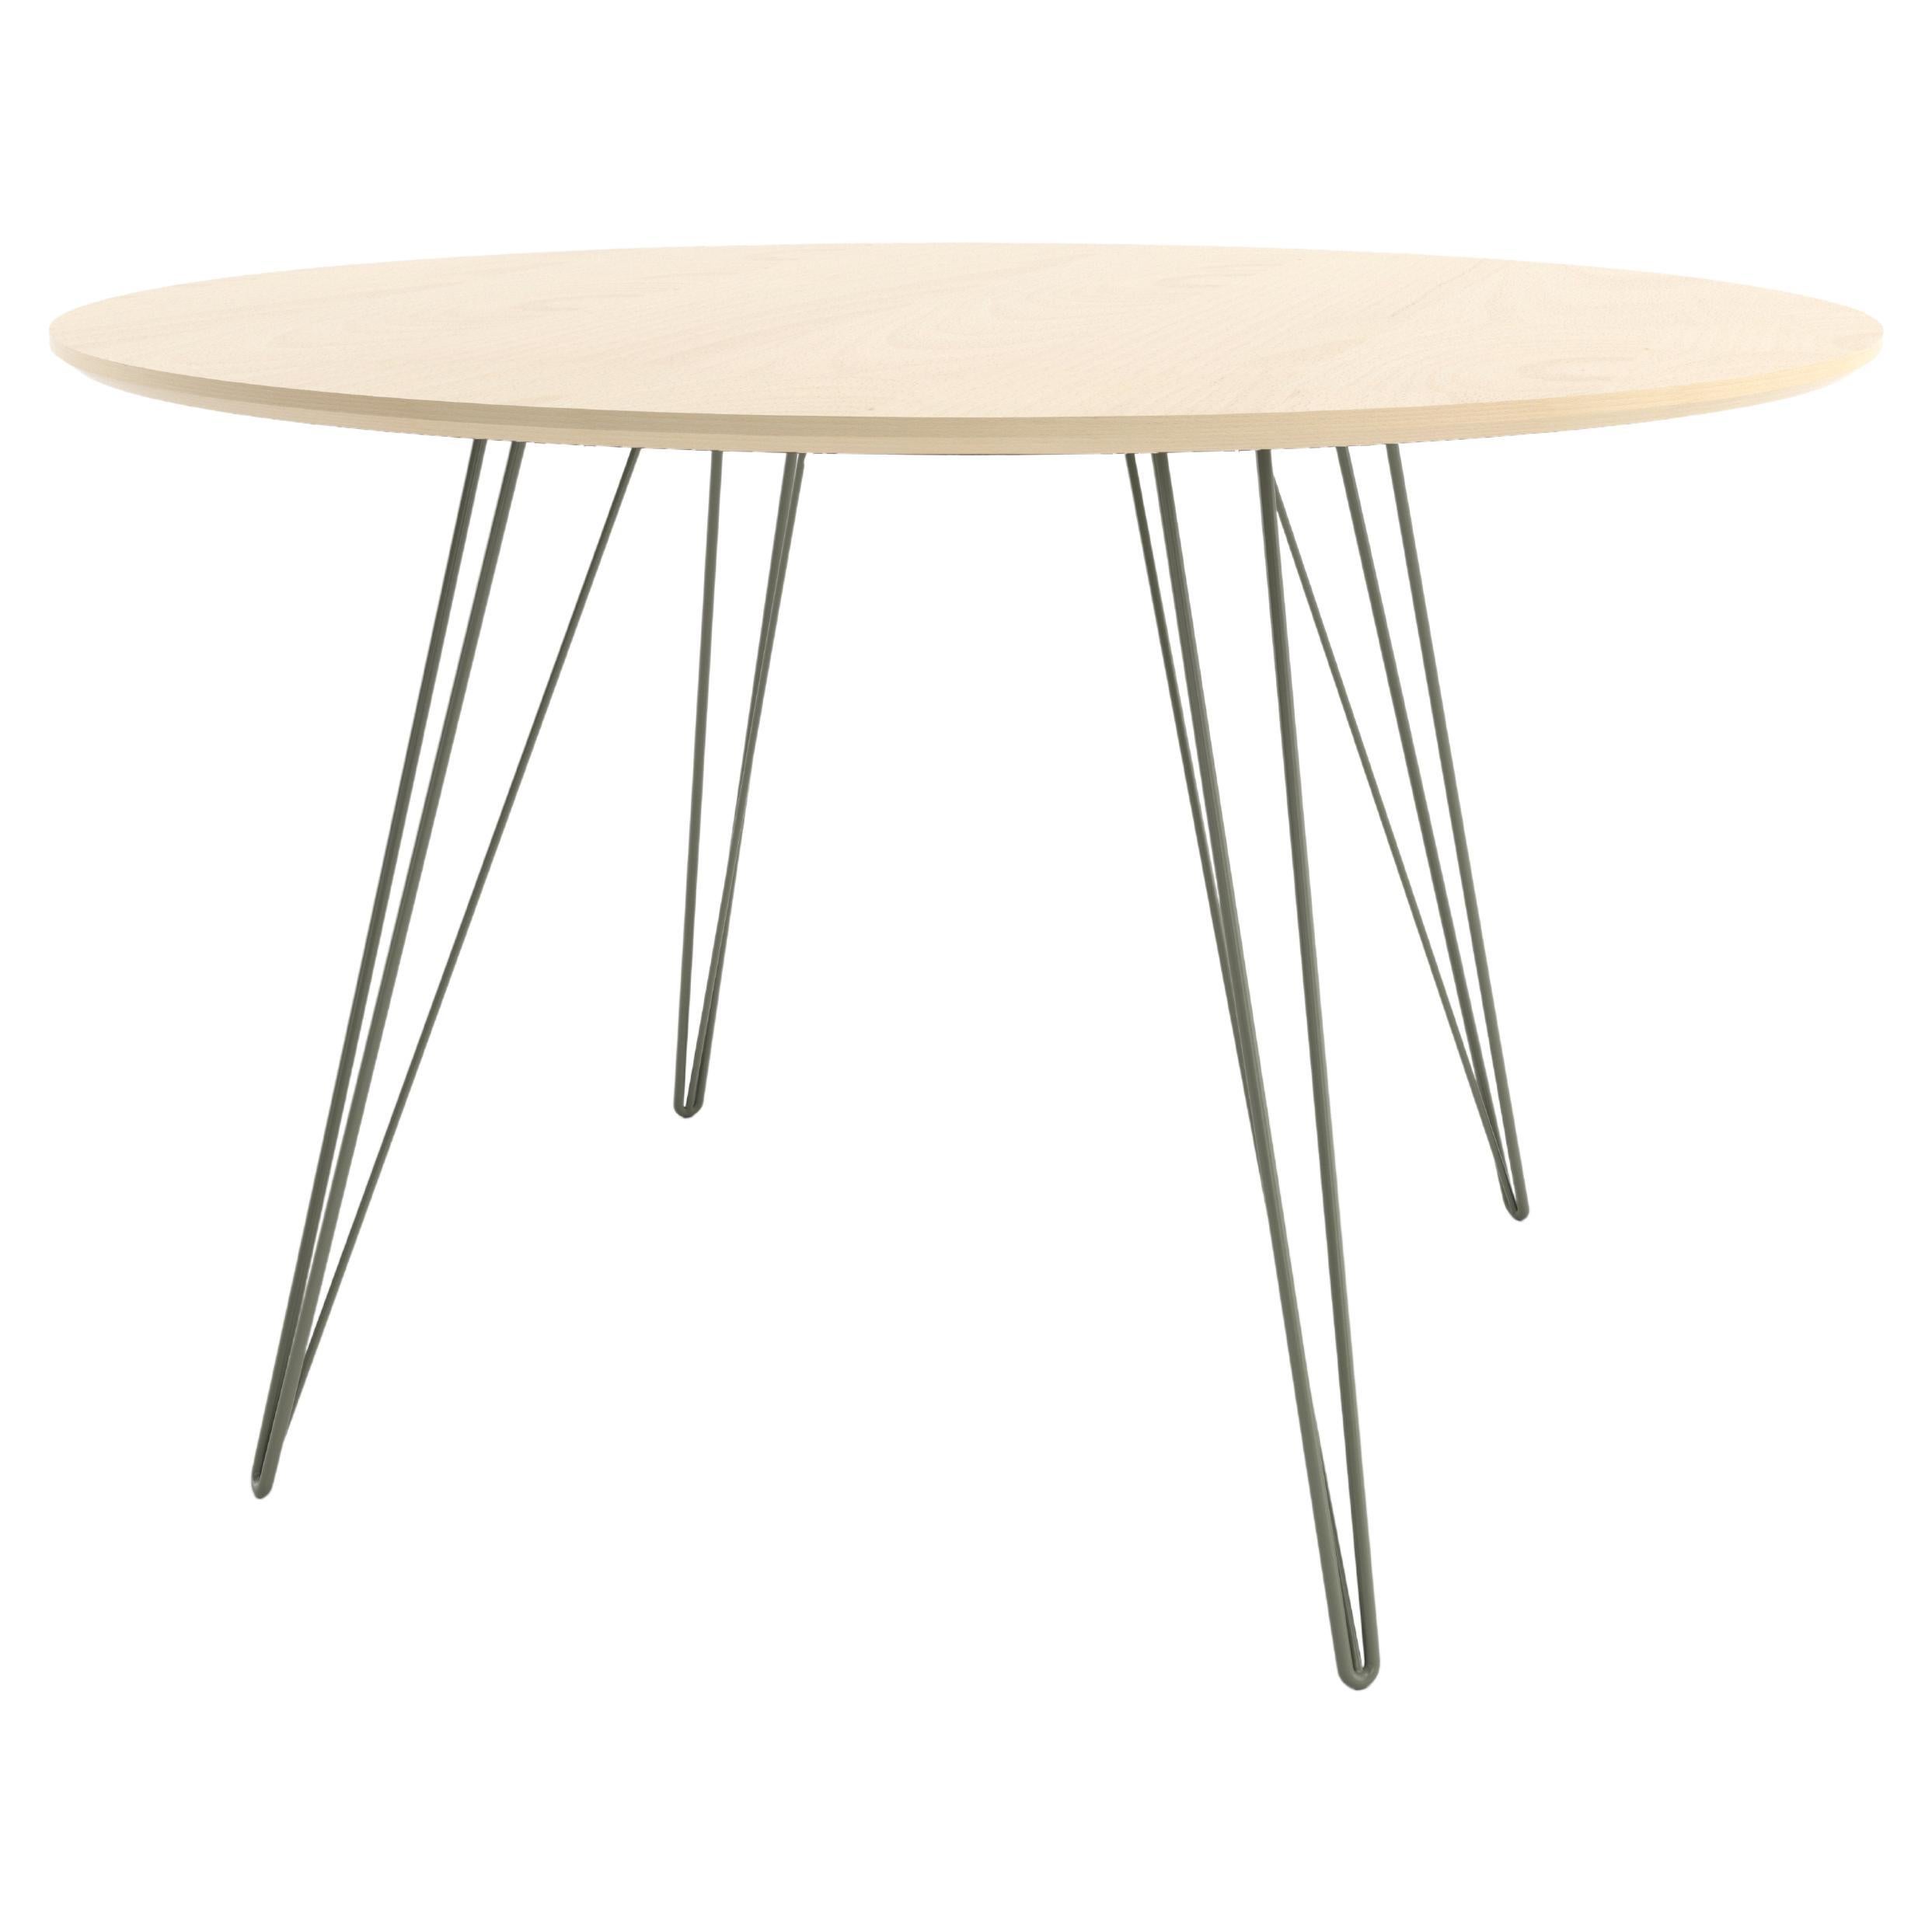 Maple Williams Dining Table Prairie Green Hairpin Legs Oval Top For Sale